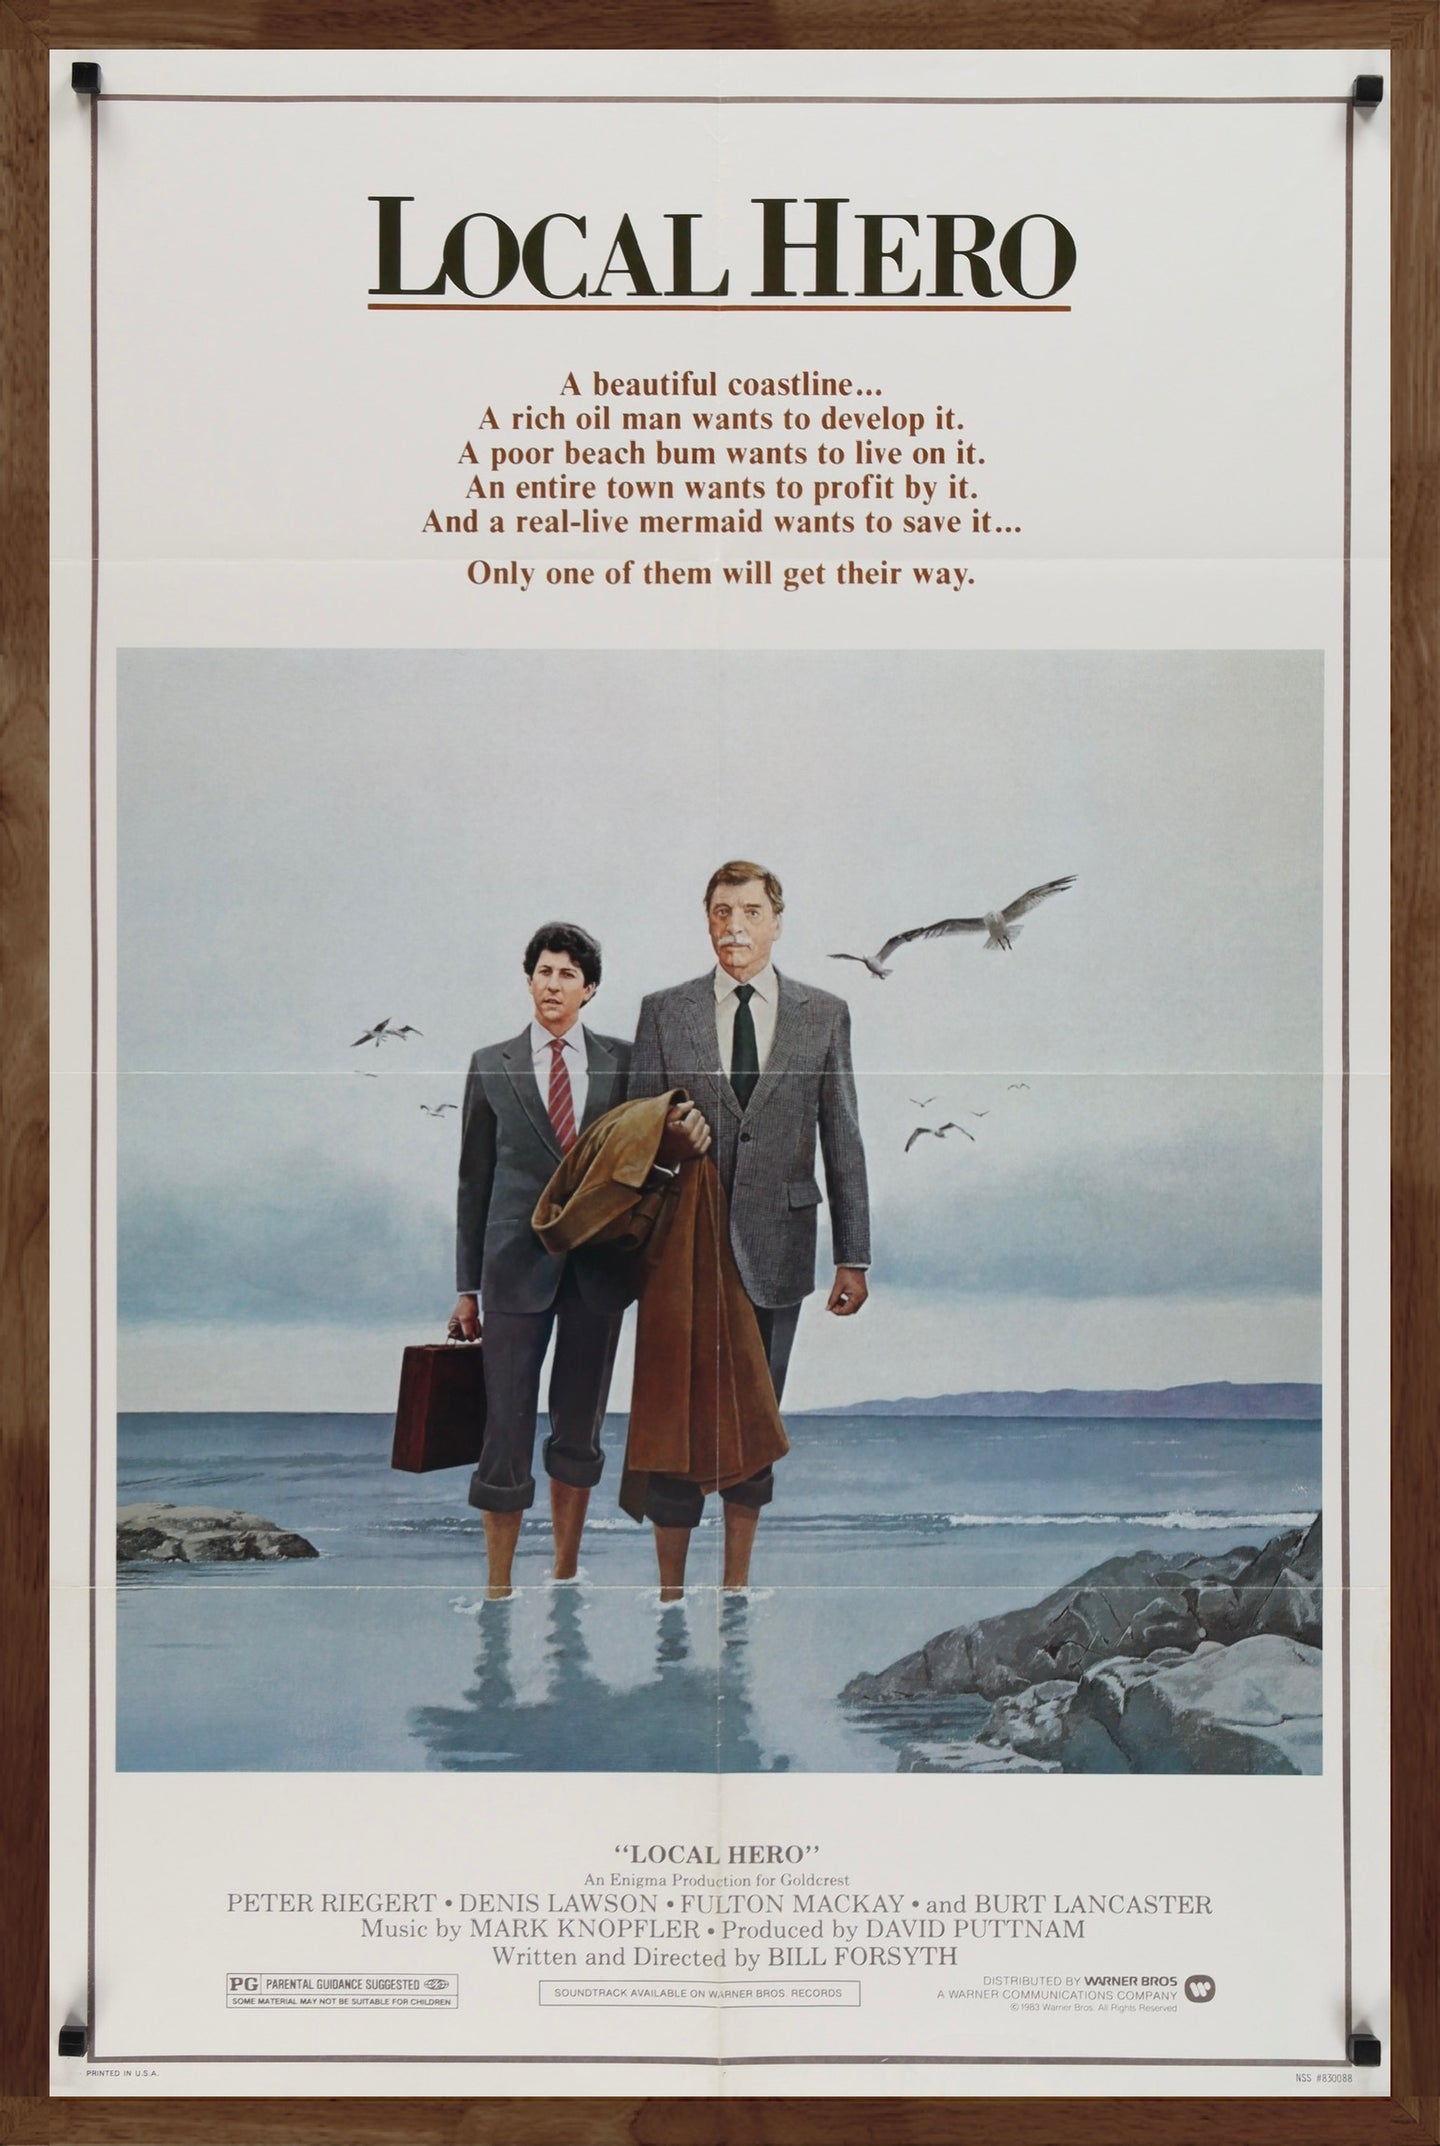 An original movie poster for the film Local Hero